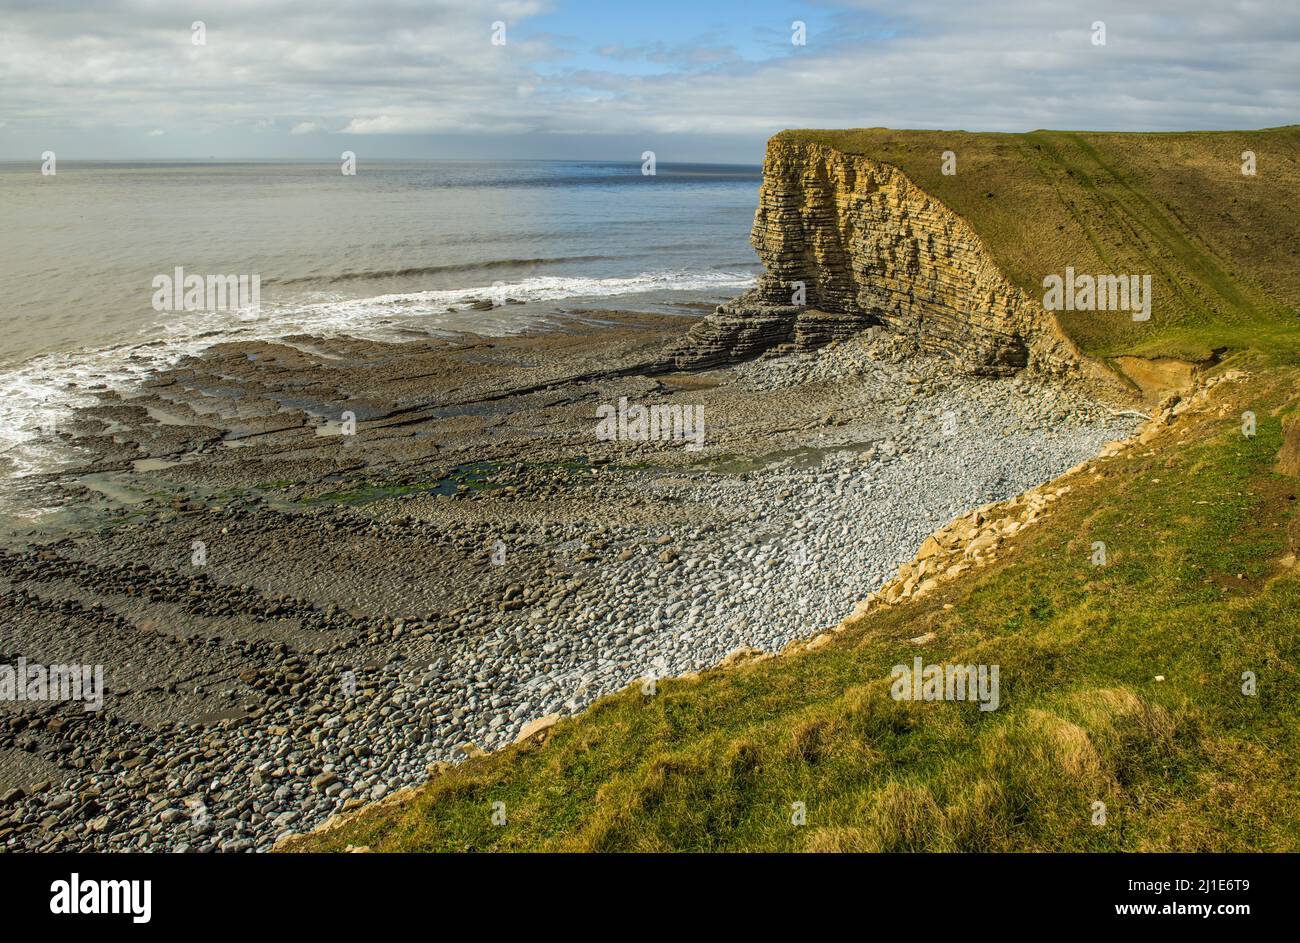 Looking down onto Nash Point or Marcross Beach from the eastern cliff side on the Glamorgan Heritage Coast. Stock Photo